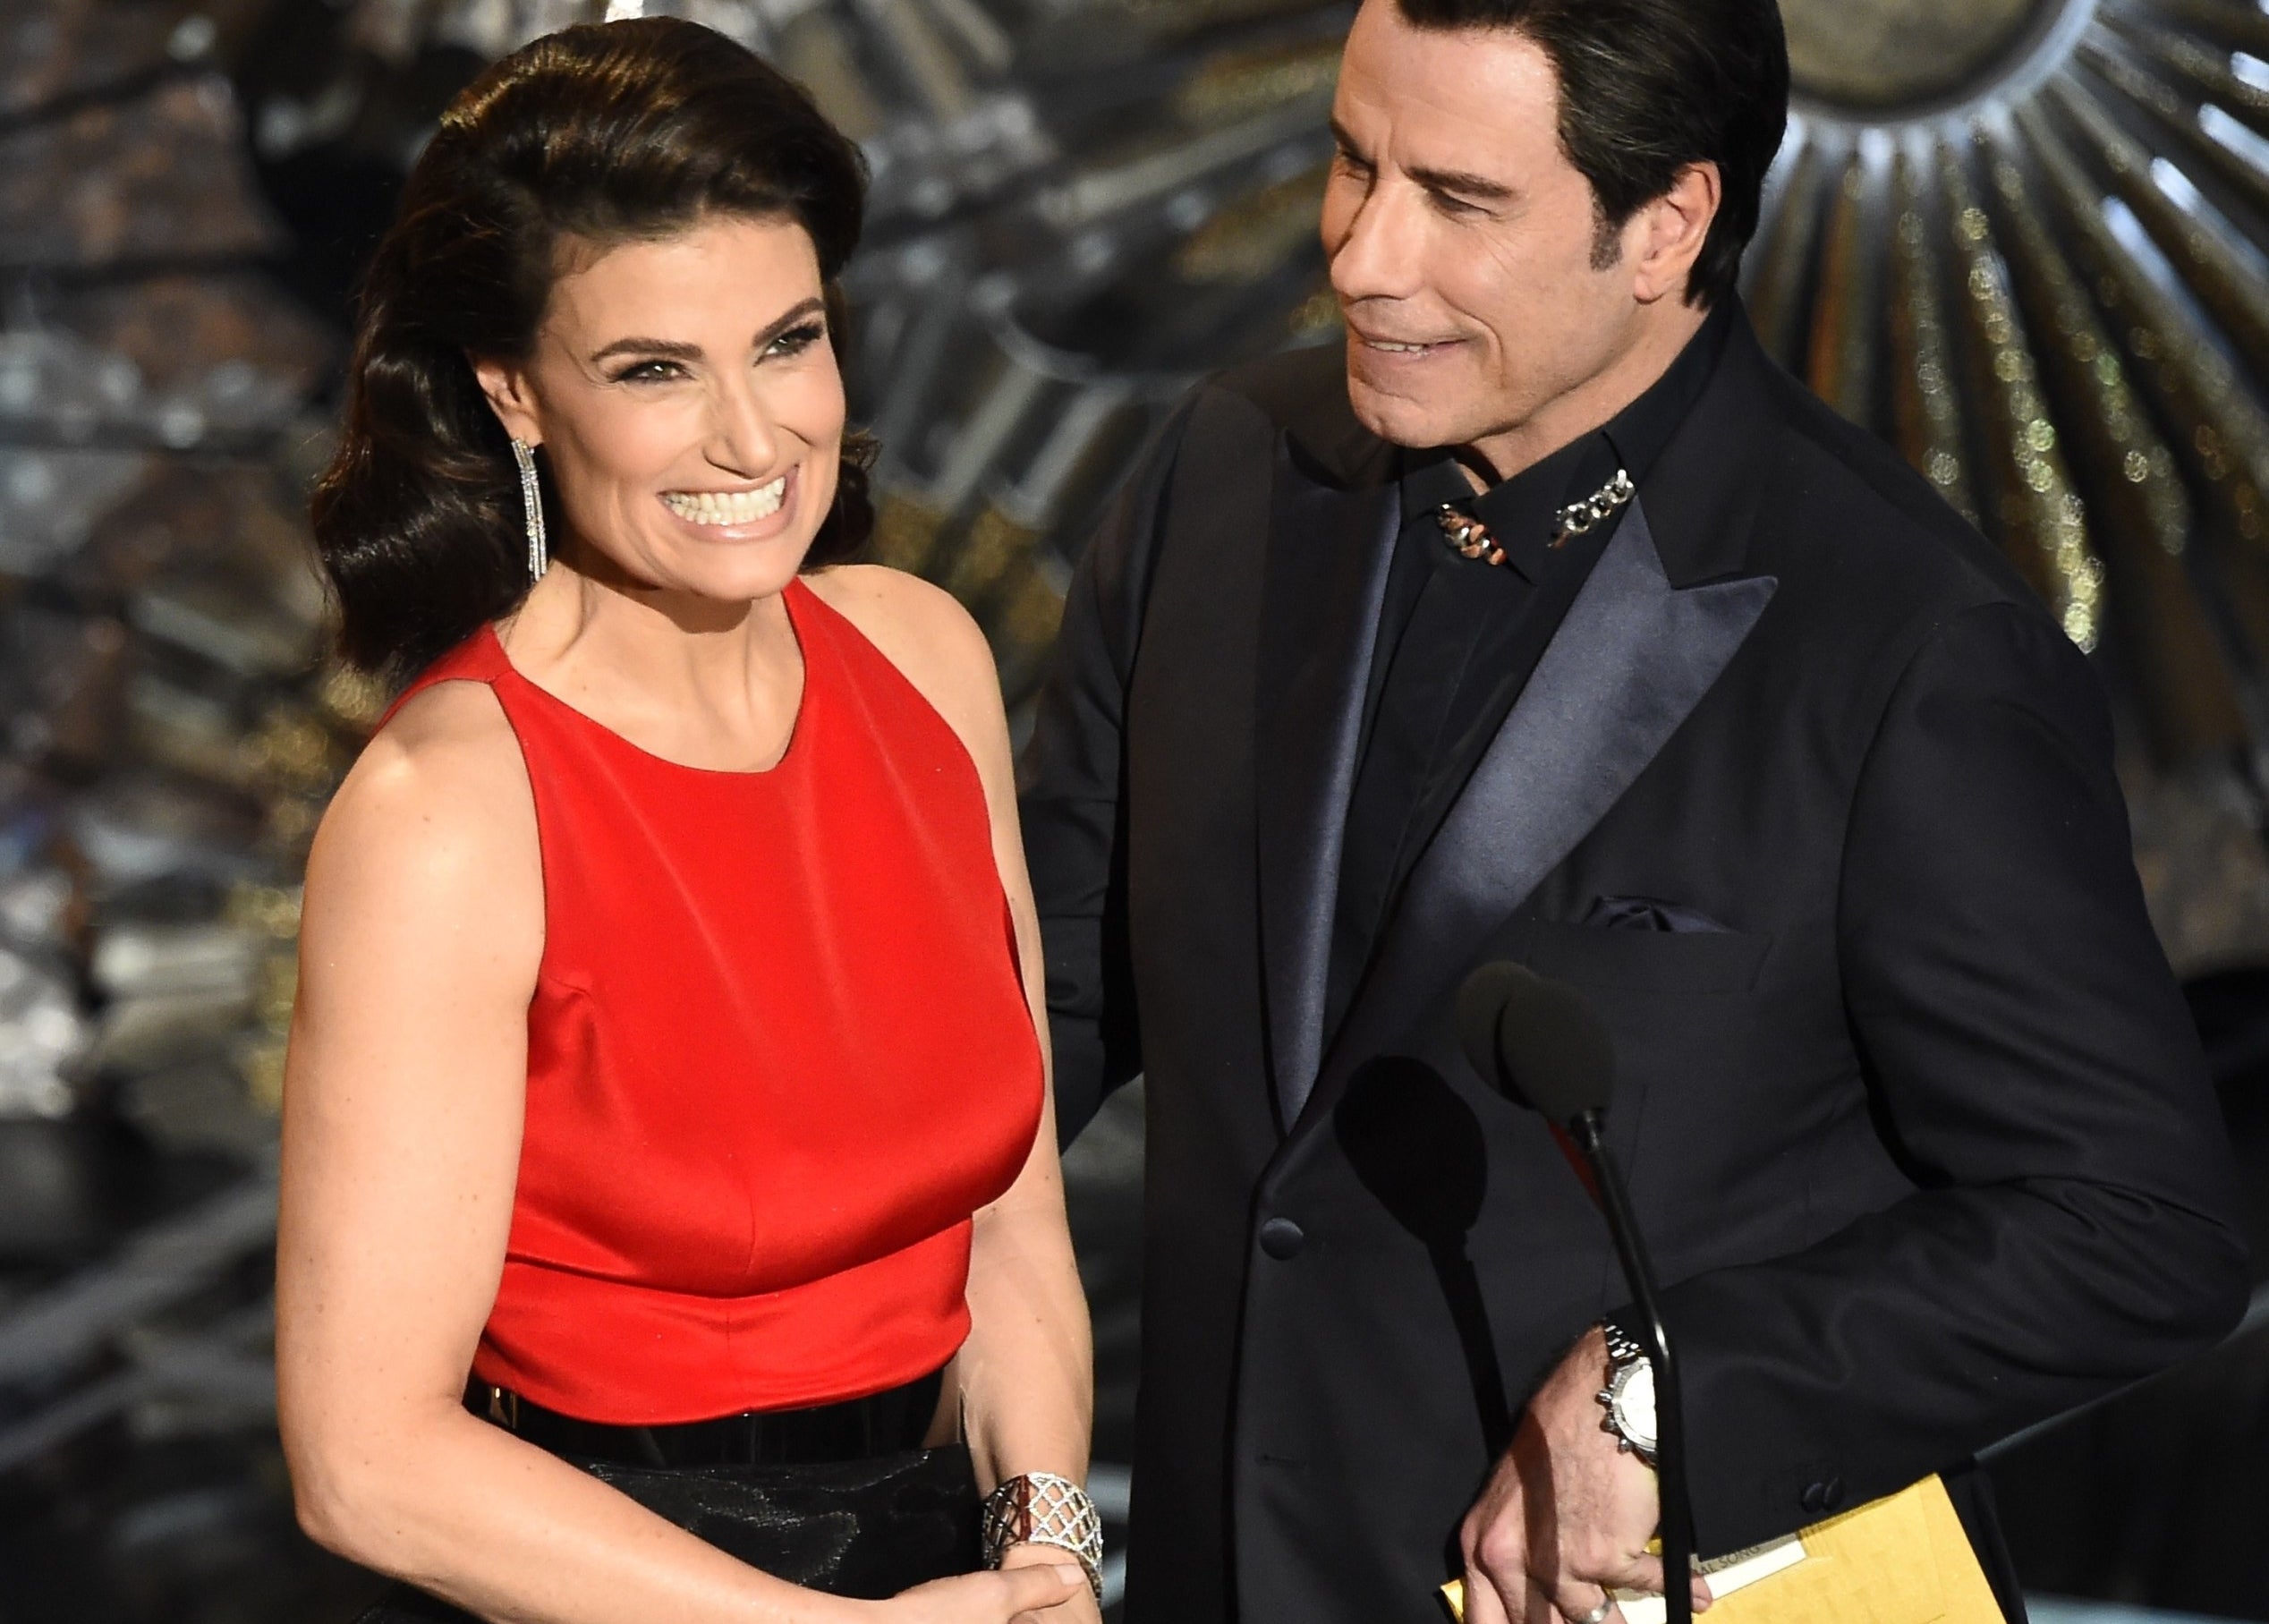 Idina and John smile while sharing the stage at a later time